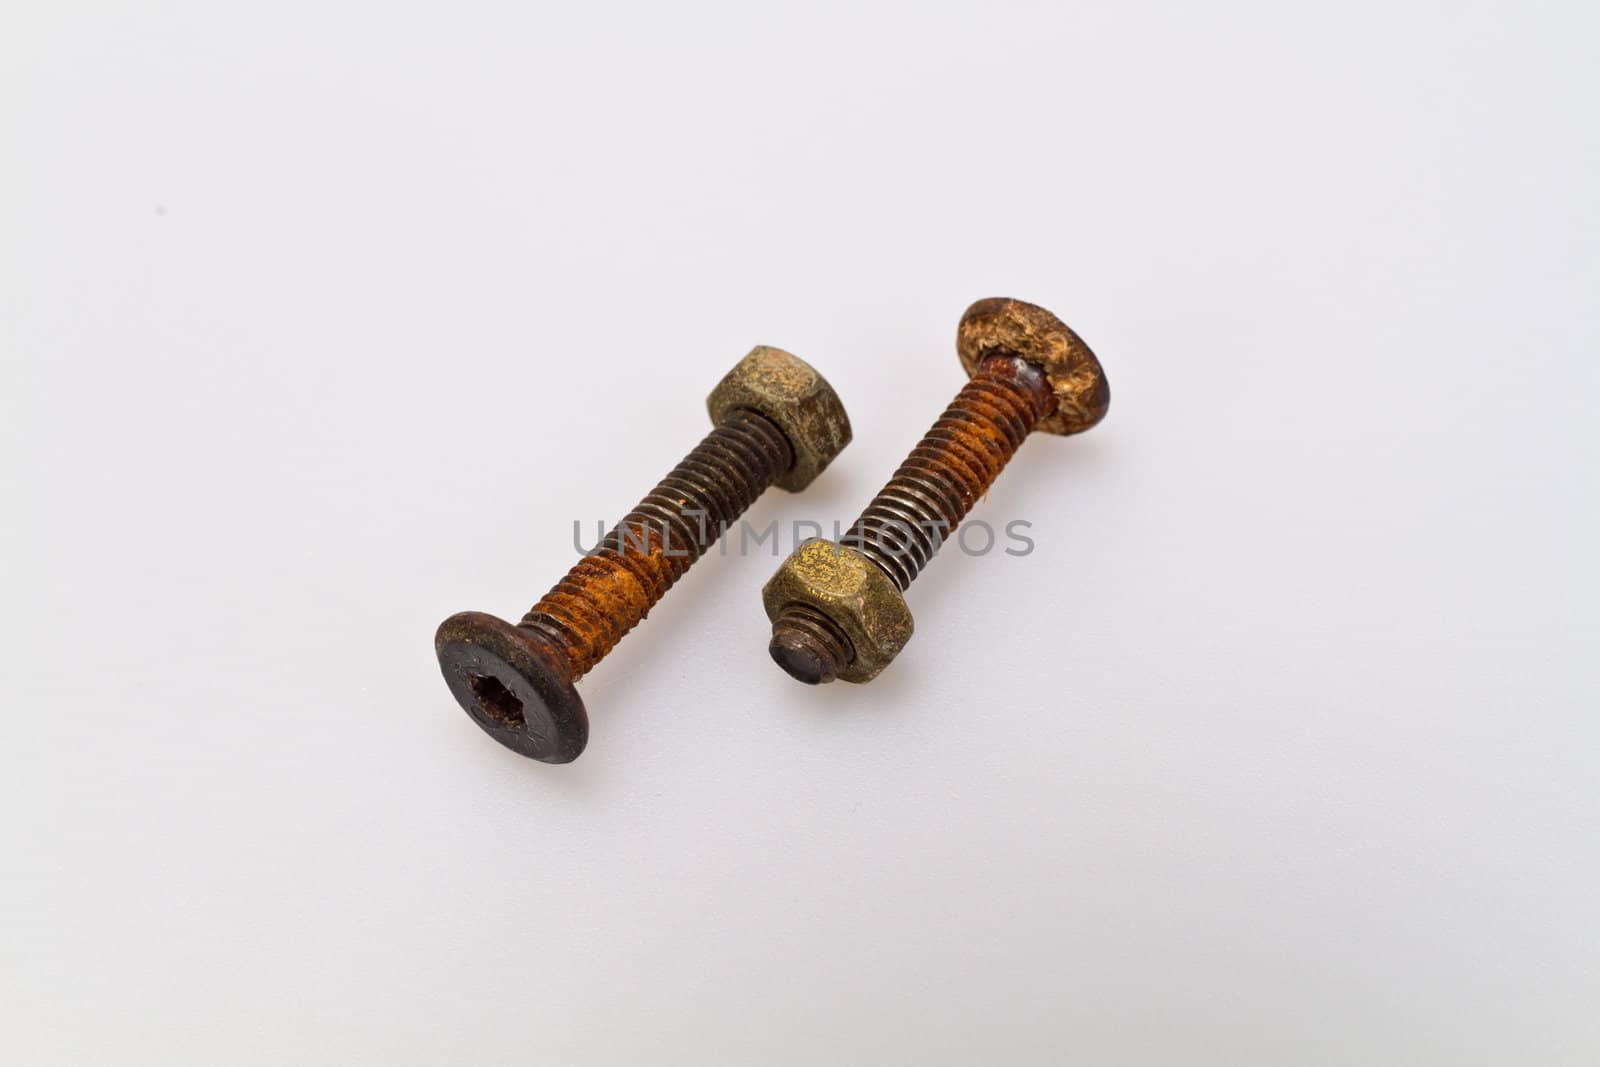 Old and rusty bolt and nut on white background